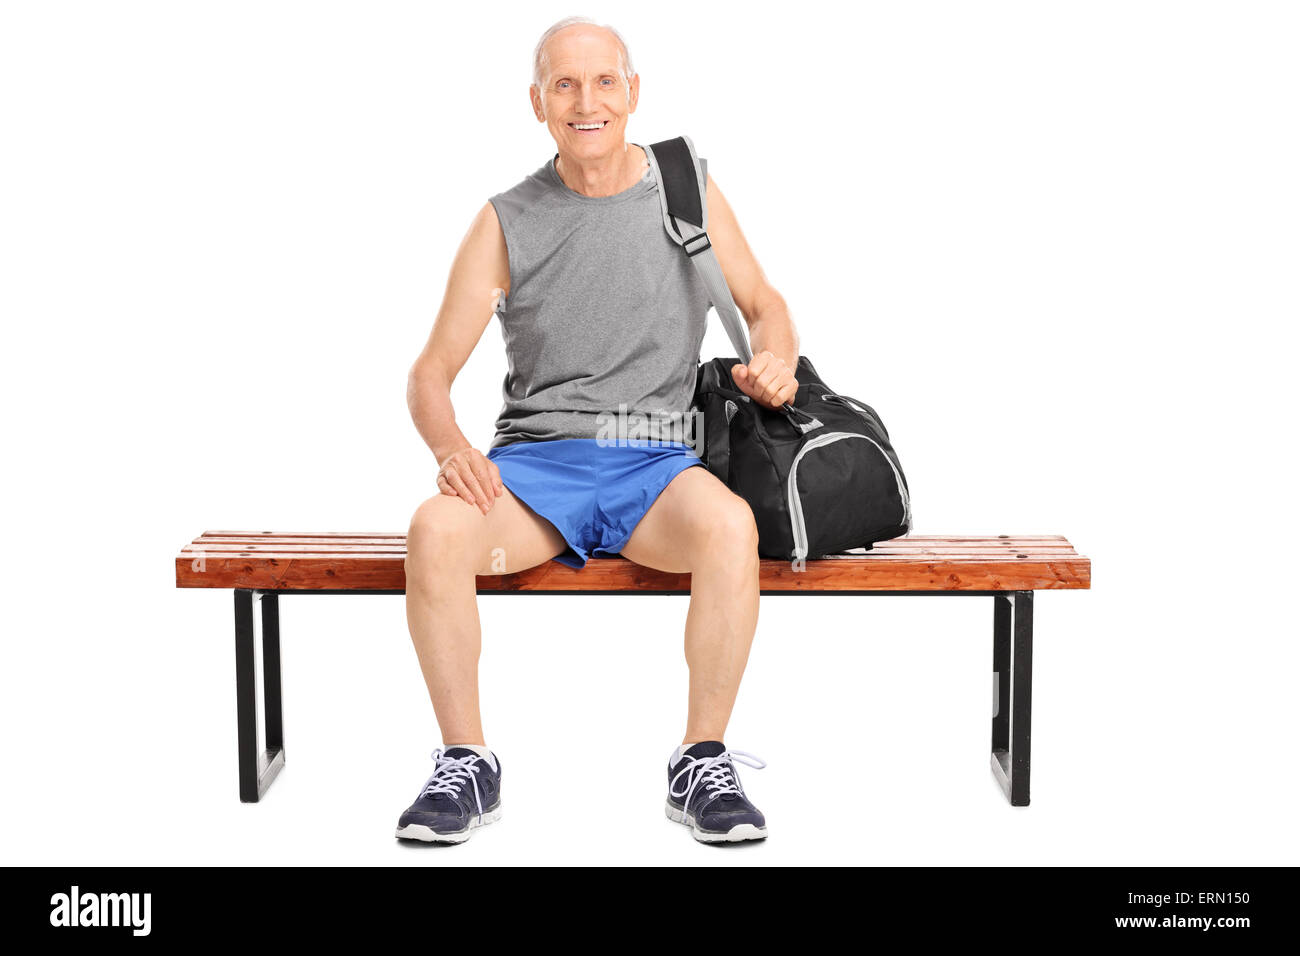 Studio shot of a senior man sitting on a wooden bench in sportswear and carrying a sports bag isolated on white background Stock Photo